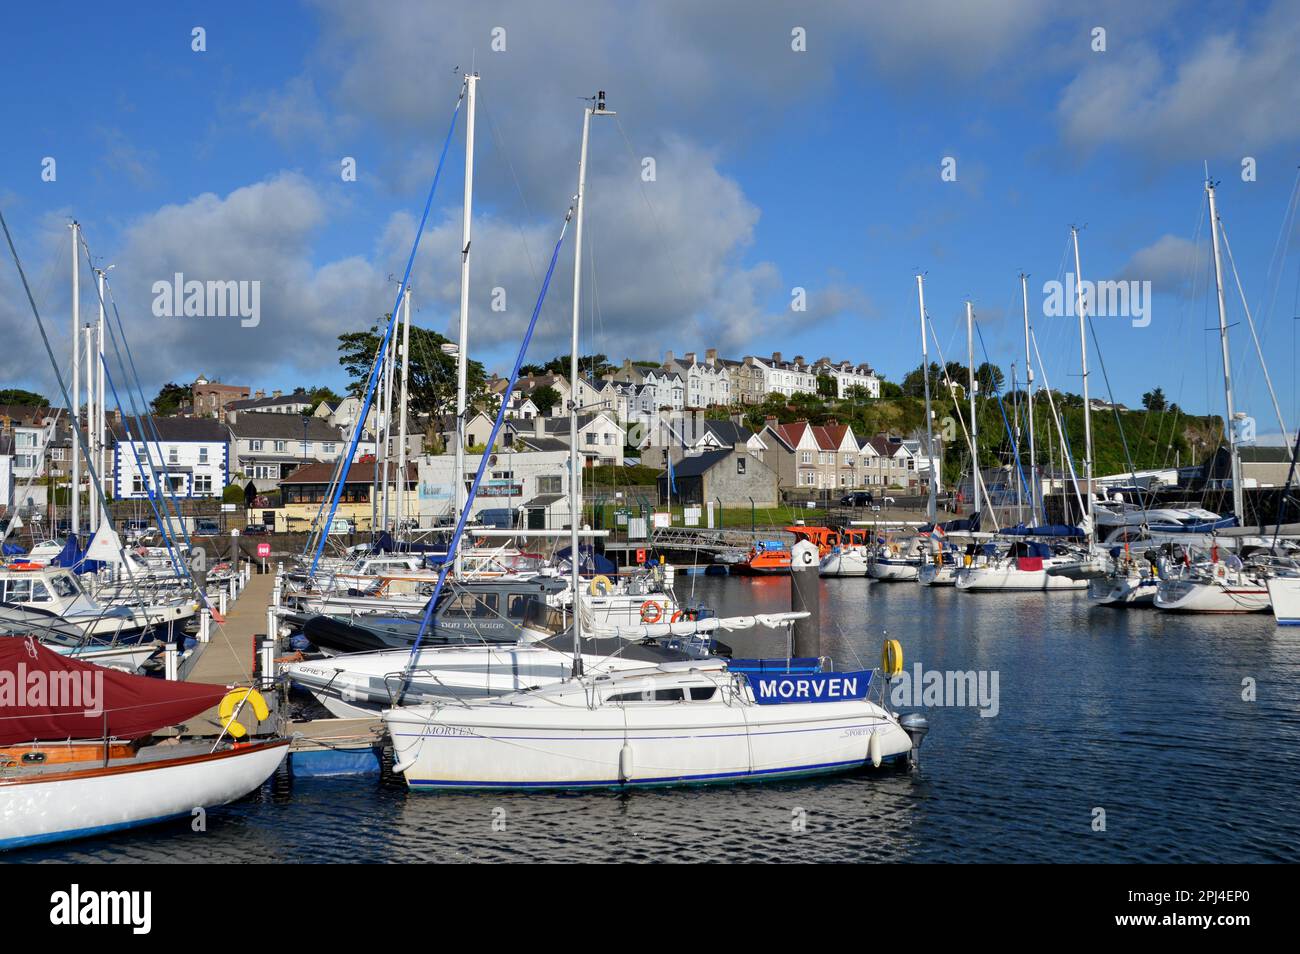 Northern Ireland, County Antrim, Ballycastle:  yachts moored in the harbour, overlooked by the rising ground of the town. Stock Photo